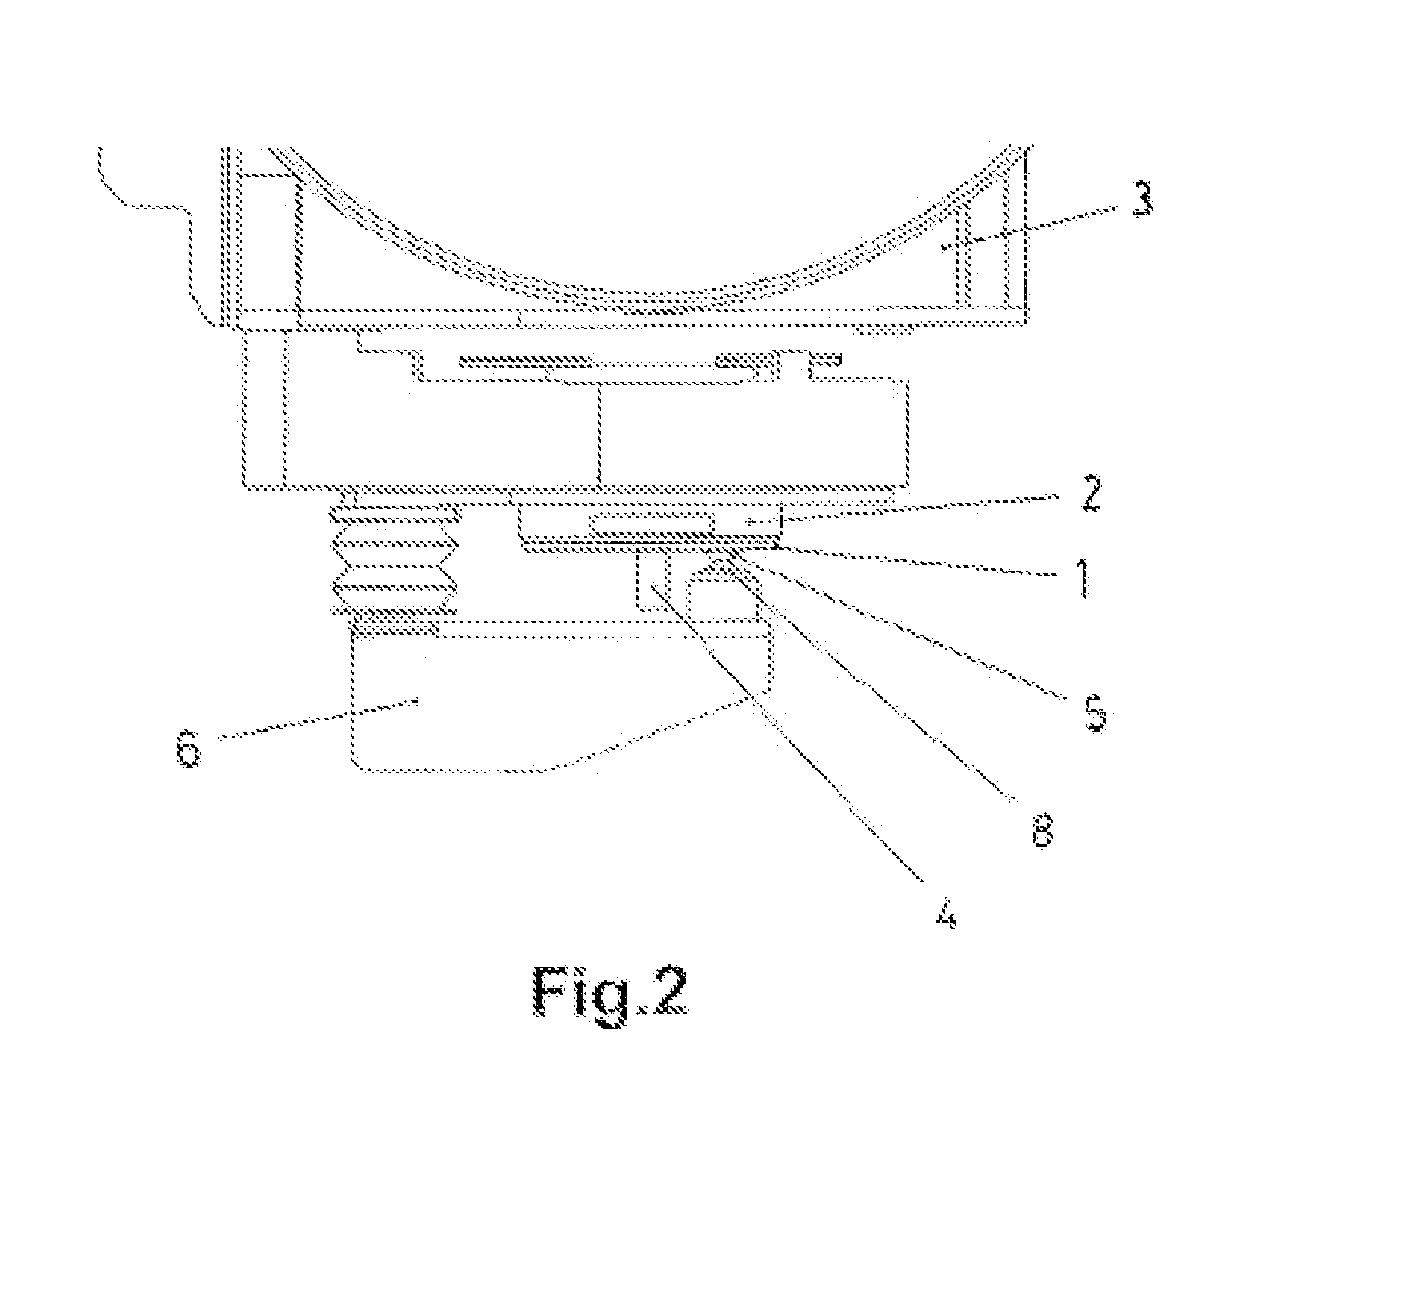 Fastening tool for dynamically fastening parts for machining